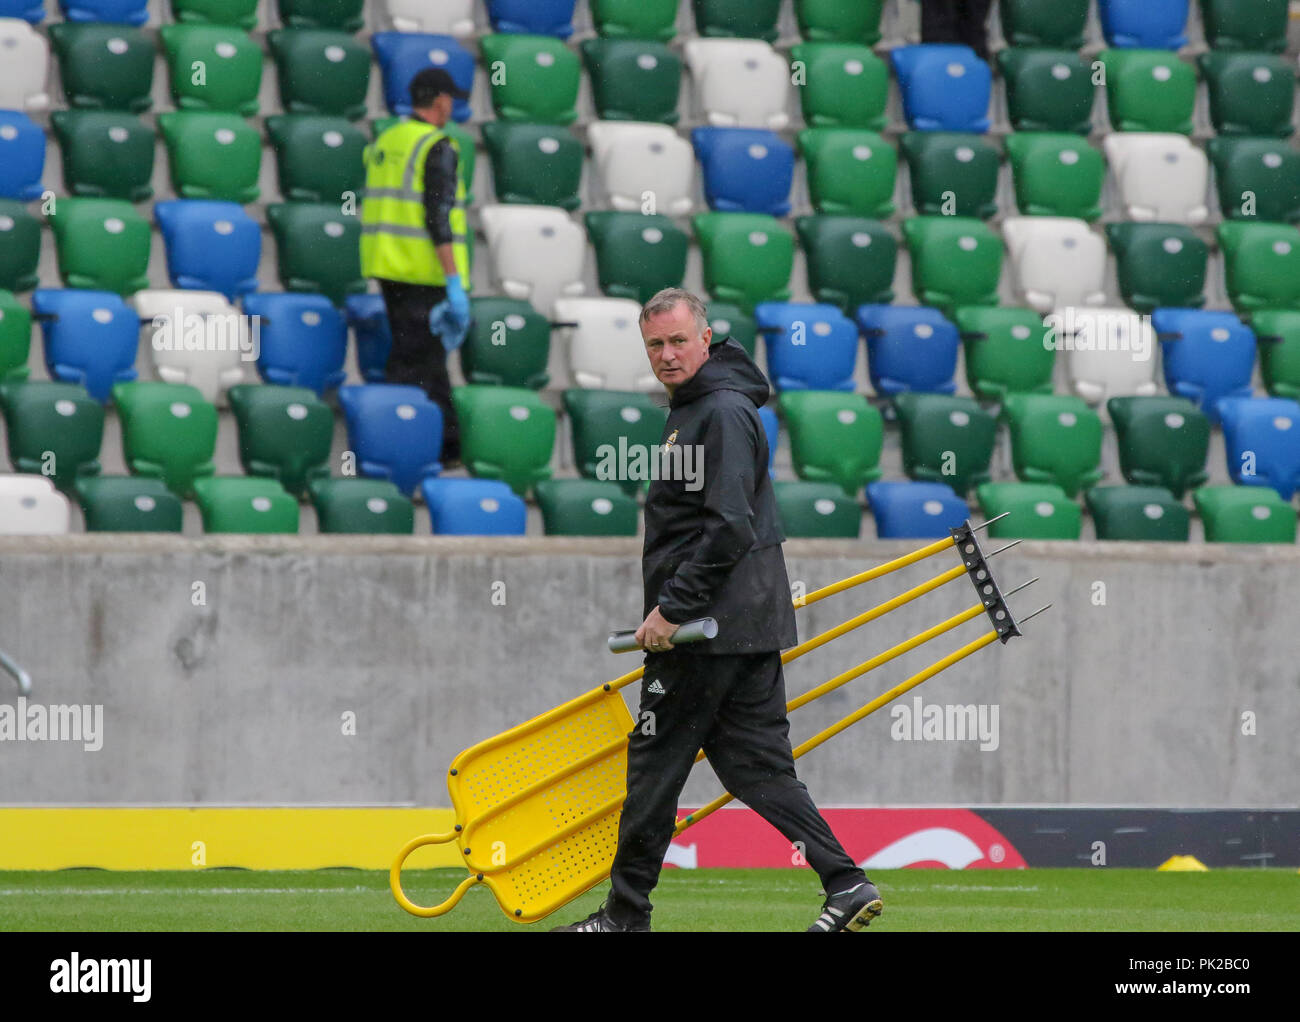 Windsor Park, Belfast, Northern Ireland. 10 September 2018. After Saturday's defeat in the UEFA Nations League, Northern Ireland returned to training this morning at Windsor Park. Tomorrow night they play Israel in a friendly international. Northern Ireland manager Michael O'Neill at this morning's session. Credit: David Hunter/Alamy Live News. Stock Photo